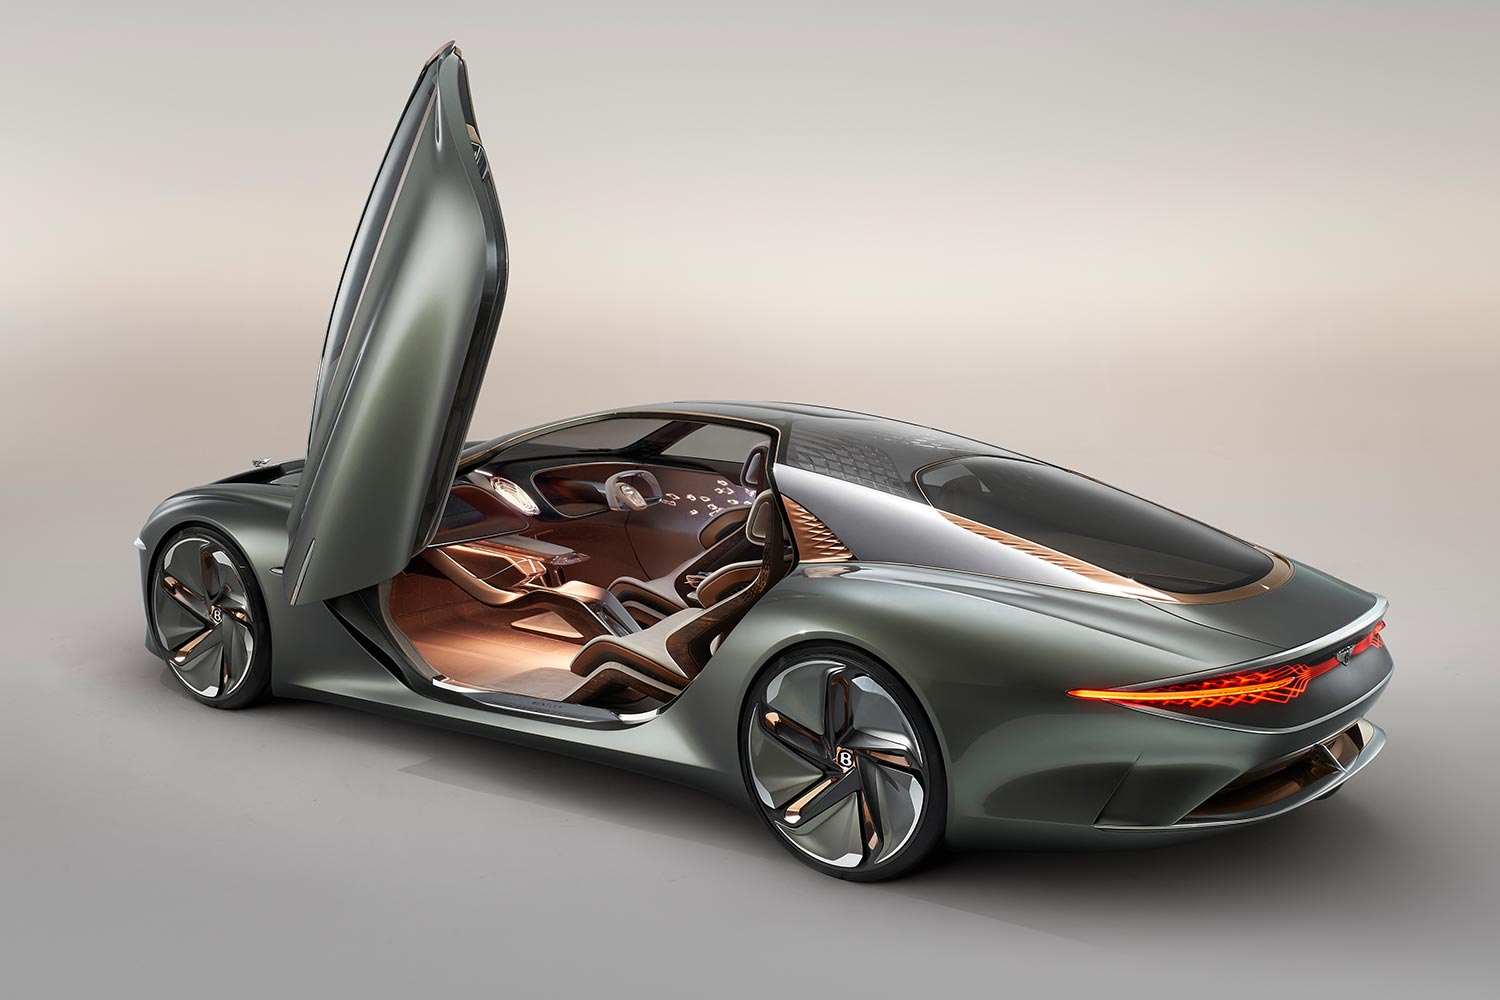 The Bentley EXP 100 GT, an electric concept car unveiled in 2019